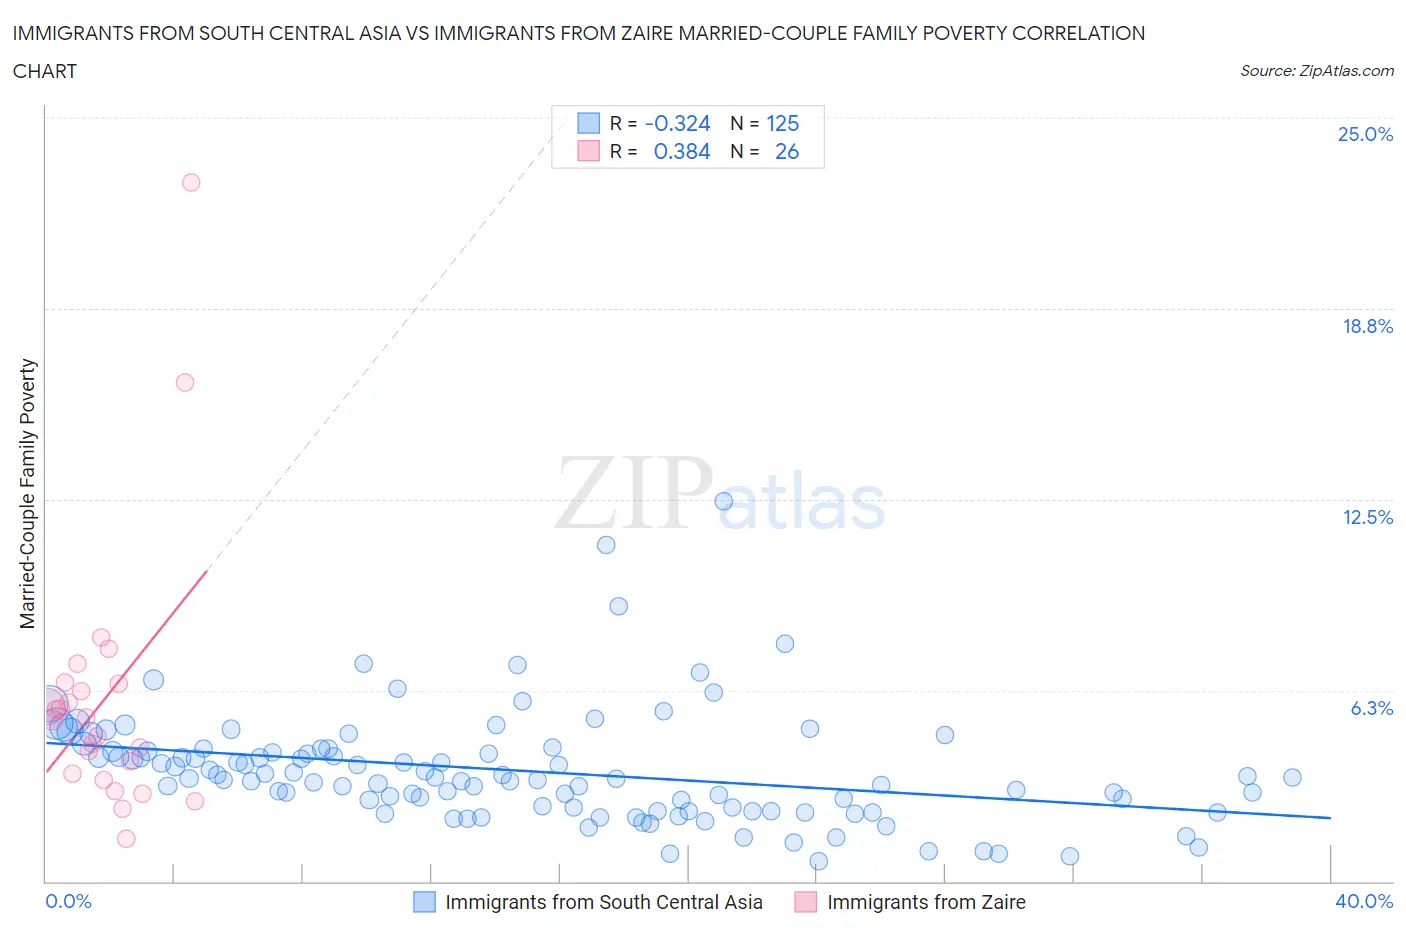 Immigrants from South Central Asia vs Immigrants from Zaire Married-Couple Family Poverty